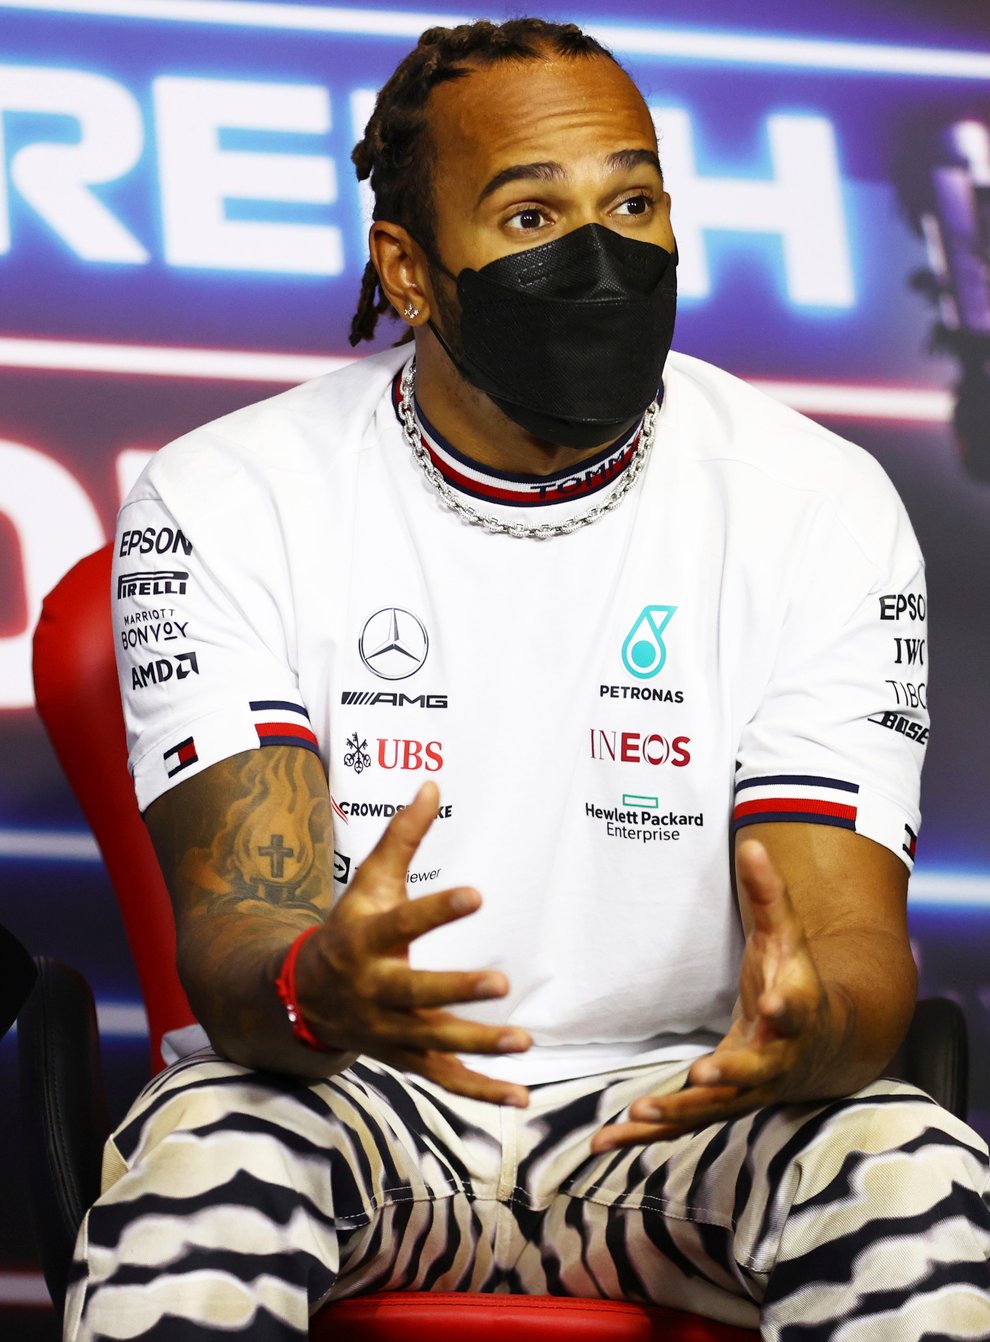 Lewis Hamilton is not worrying about Max Verstappen's title lead